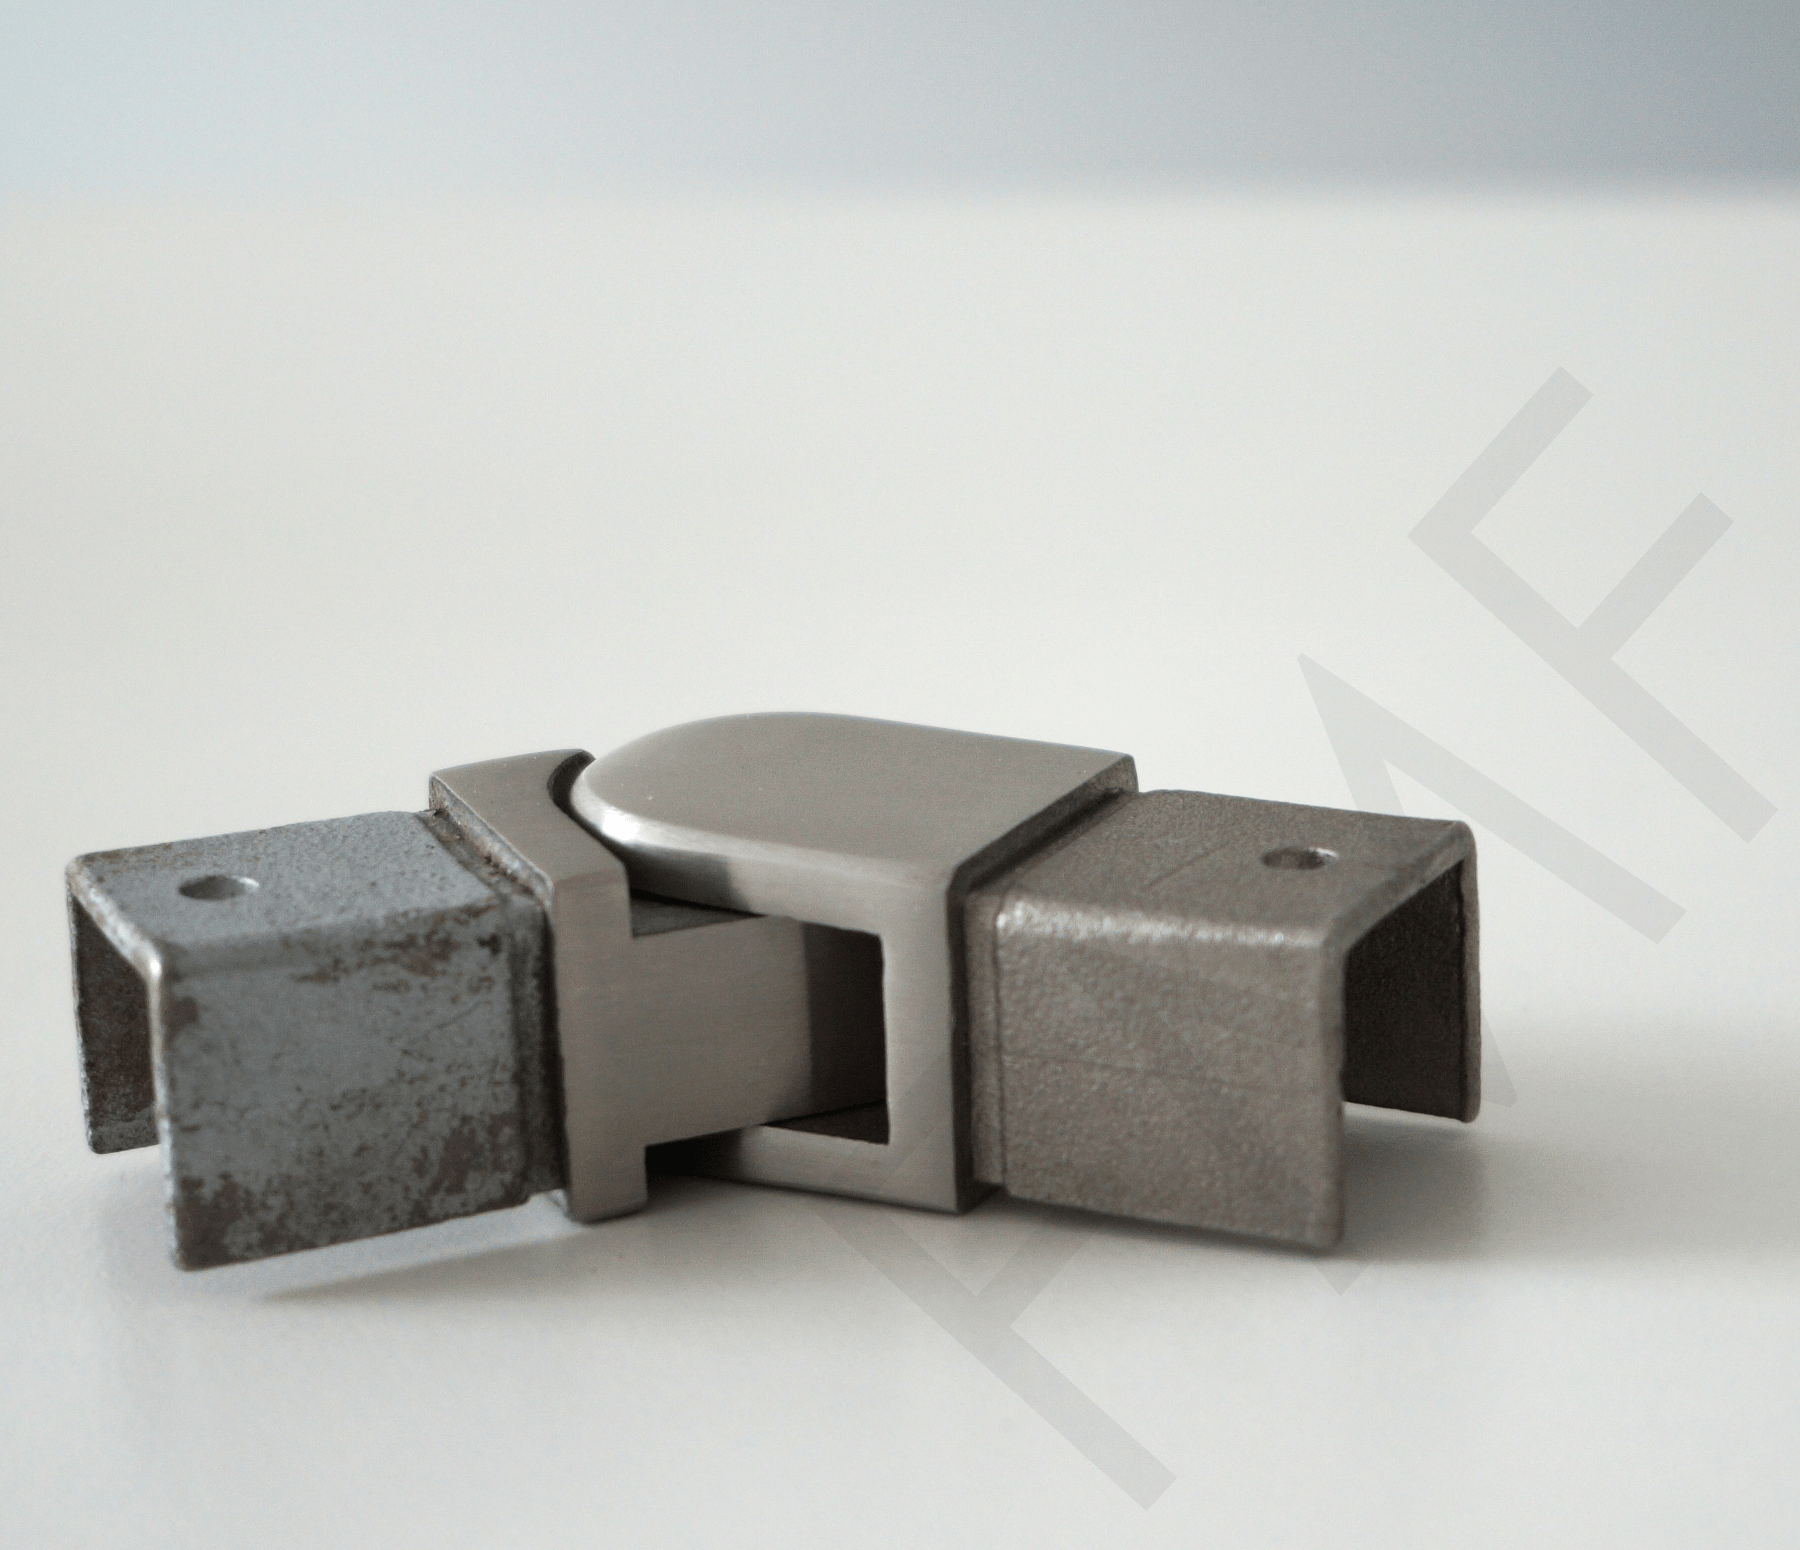 90° Adjustable H-Elbow for 25x21mm Square Cap Handrail